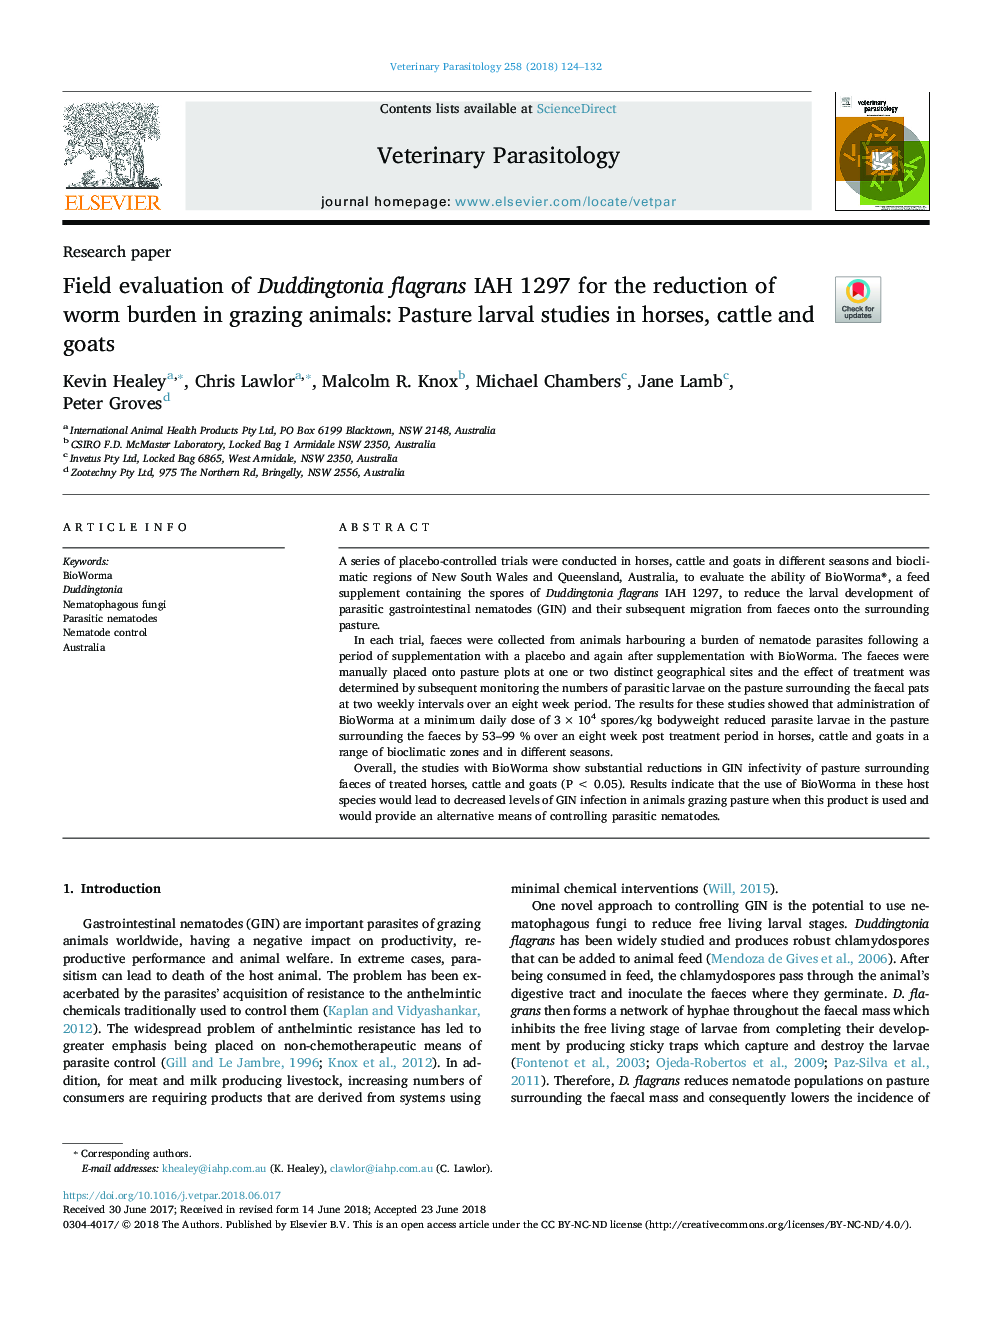 Field evaluation of Duddingtonia flagrans IAH 1297 for the reduction of worm burden in grazing animals: Pasture larval studies in horses, cattle and goats